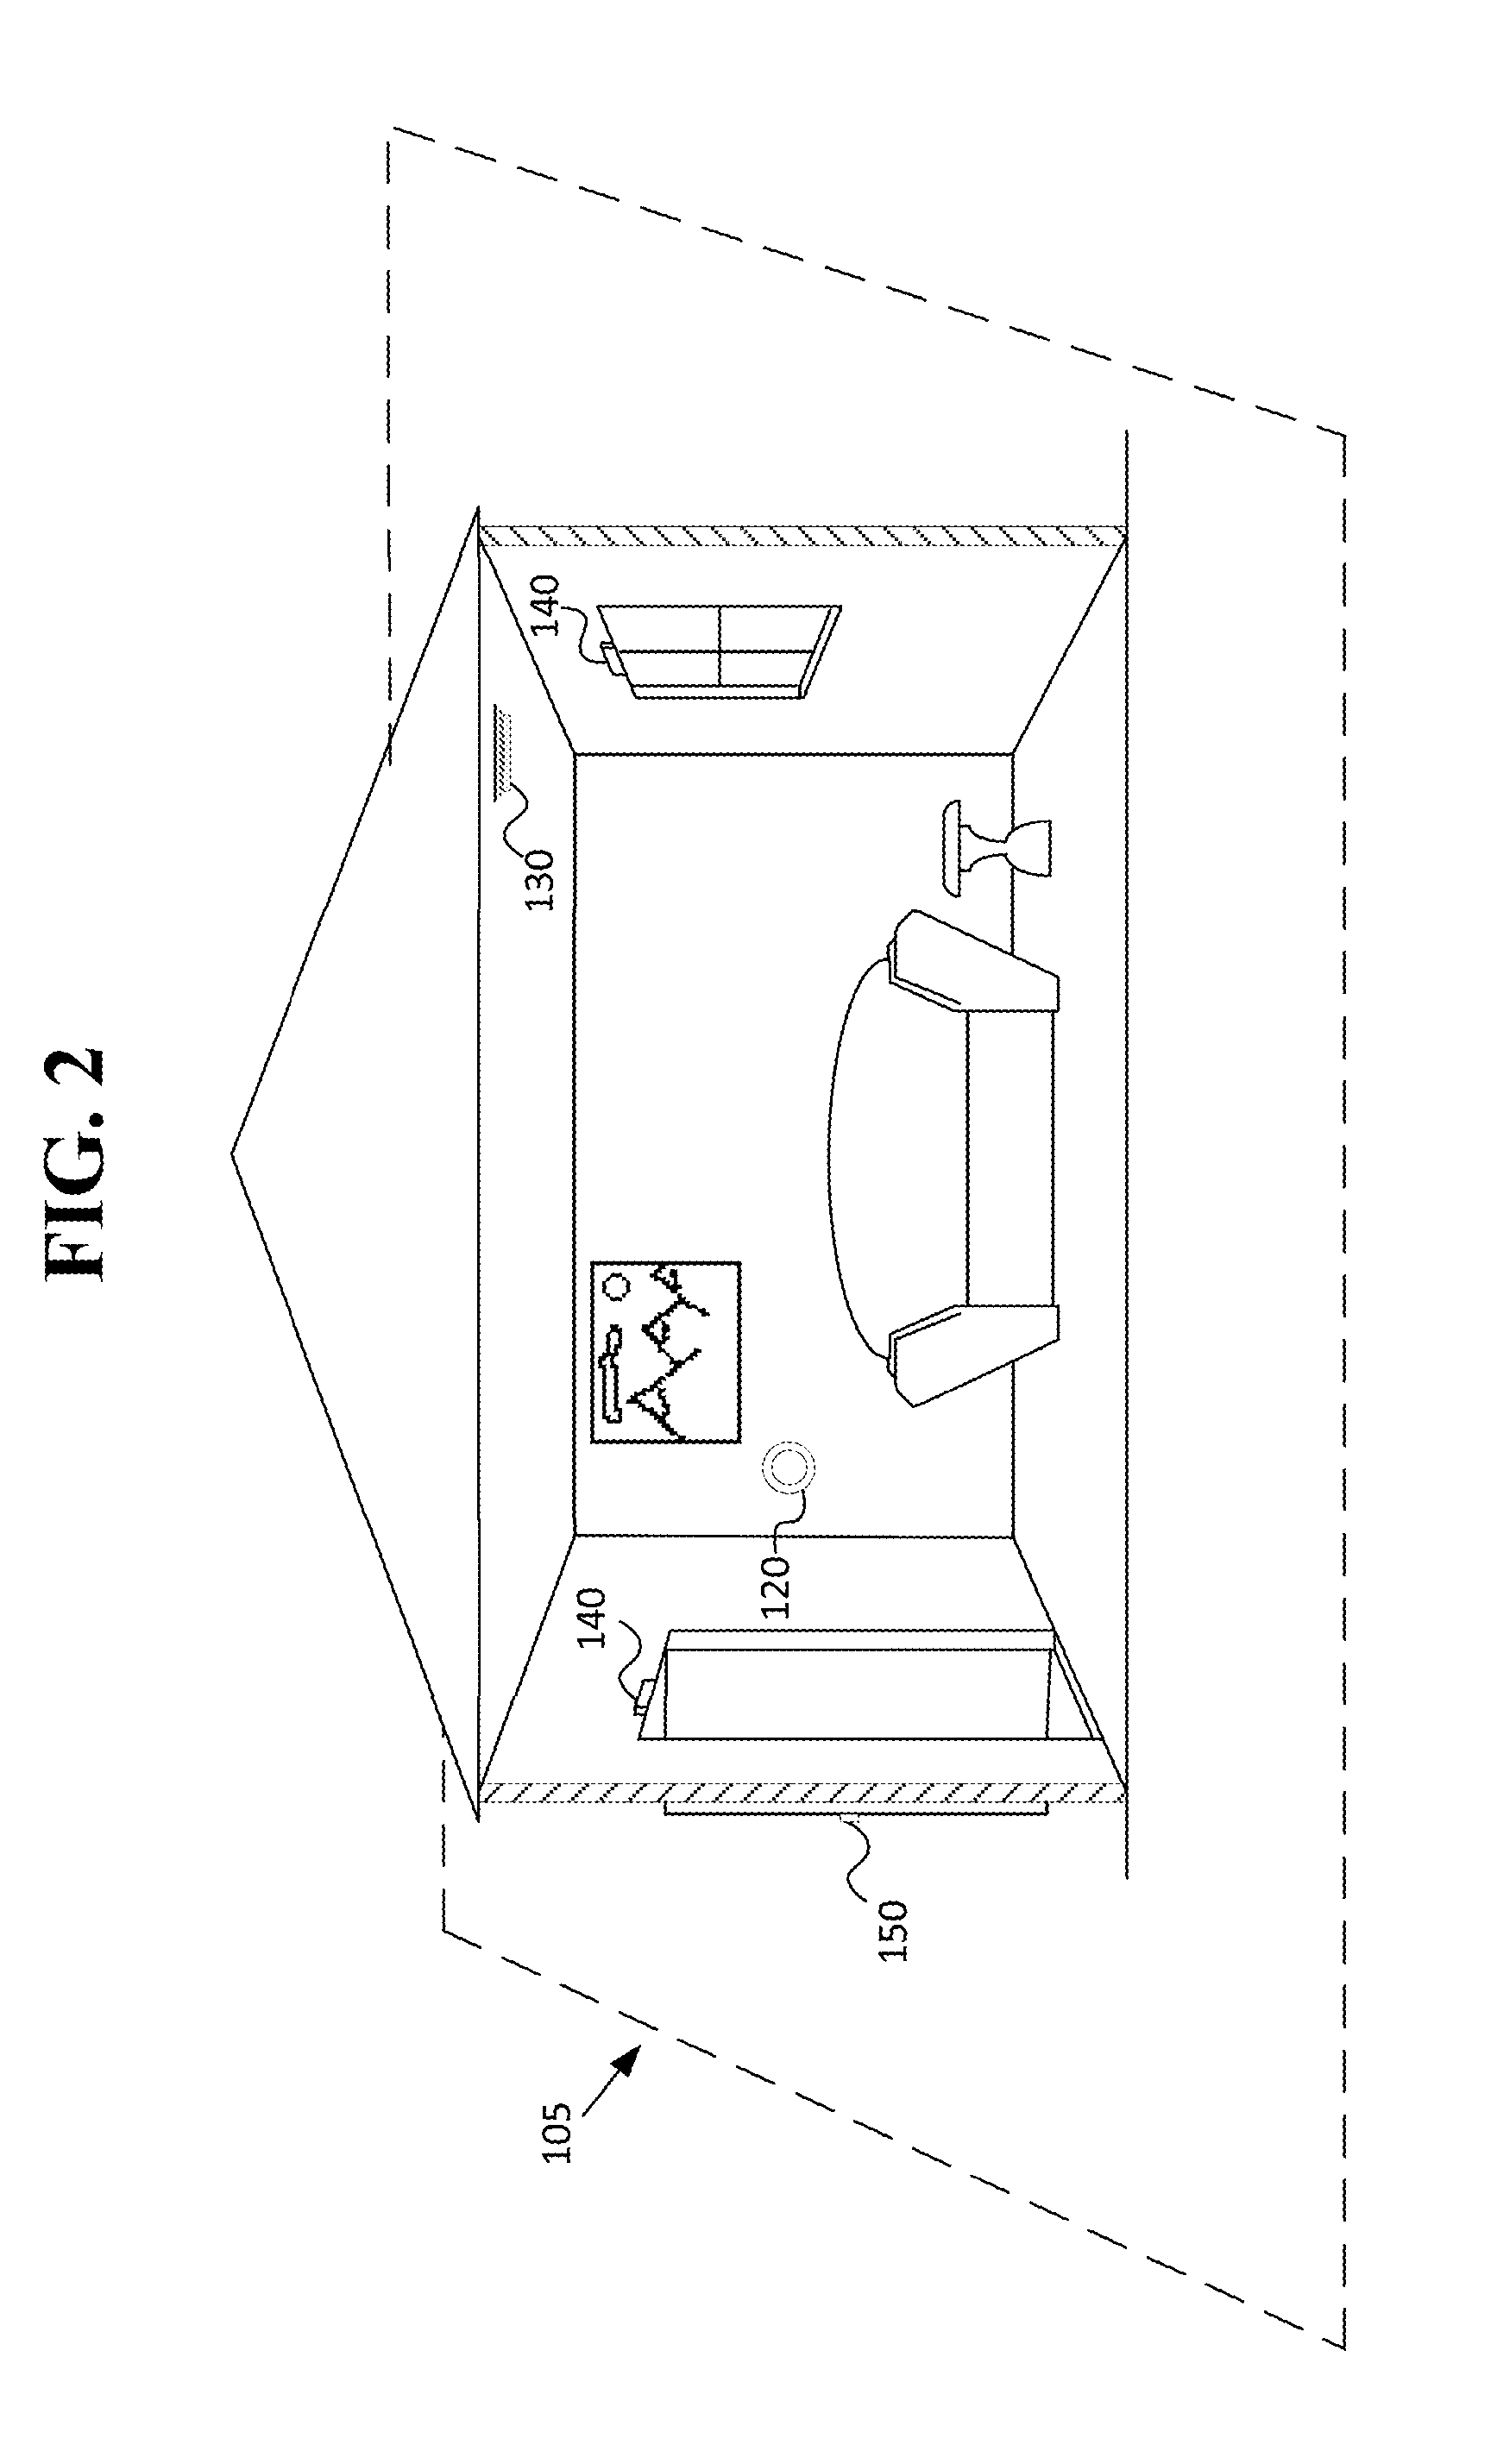 Home Security System With Automatic Context-Sensitive Transition To Different Modes